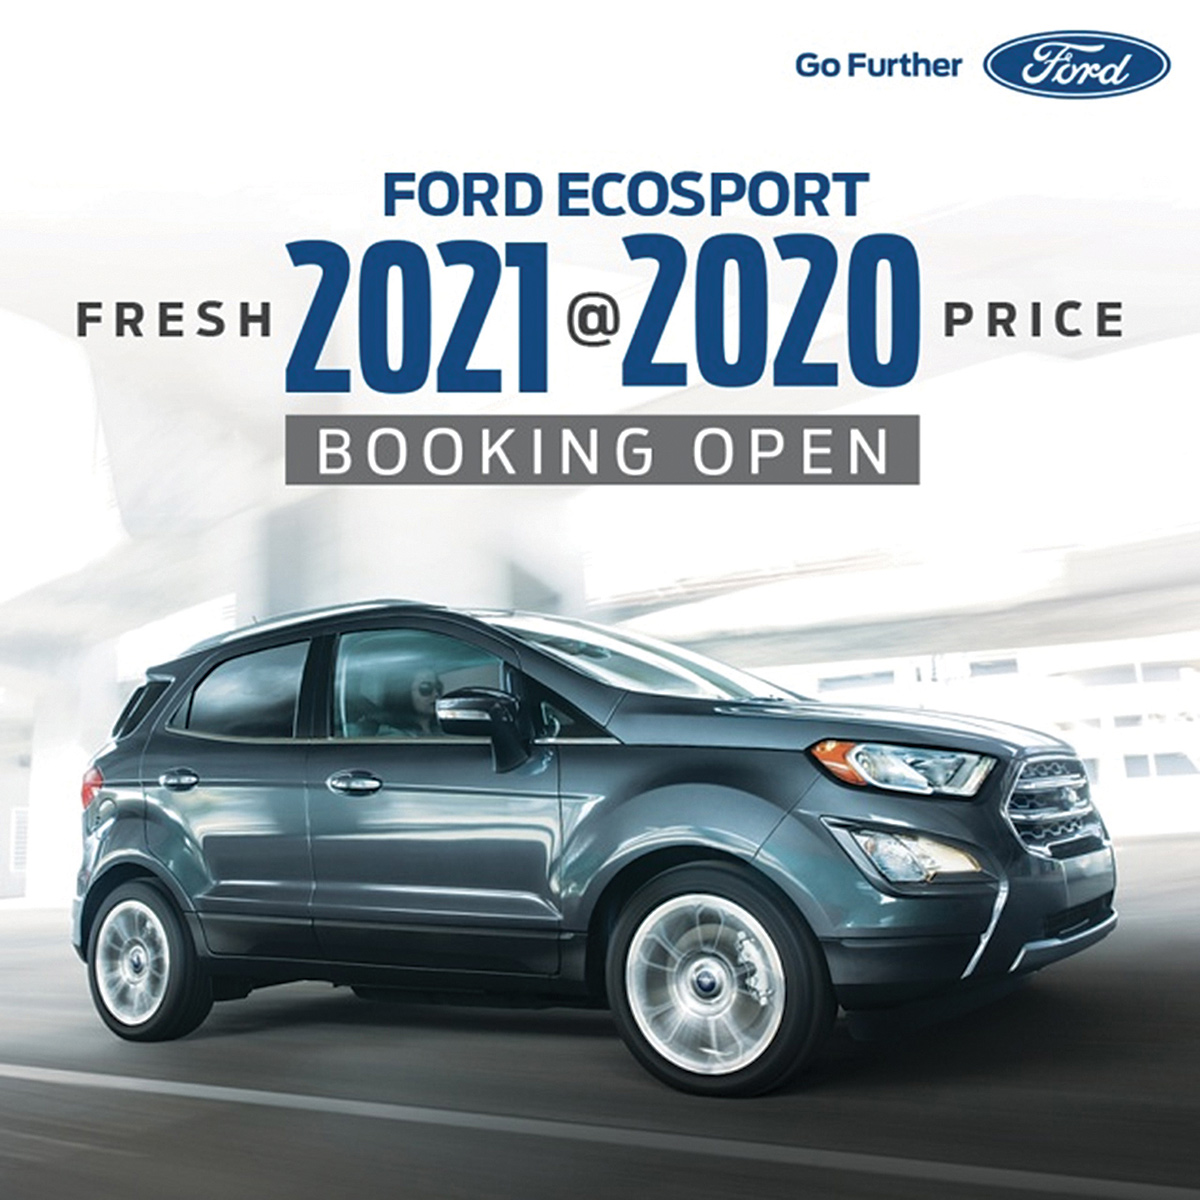 Booking Open for fresh 2021 make Ford EcoSport at 2020 price